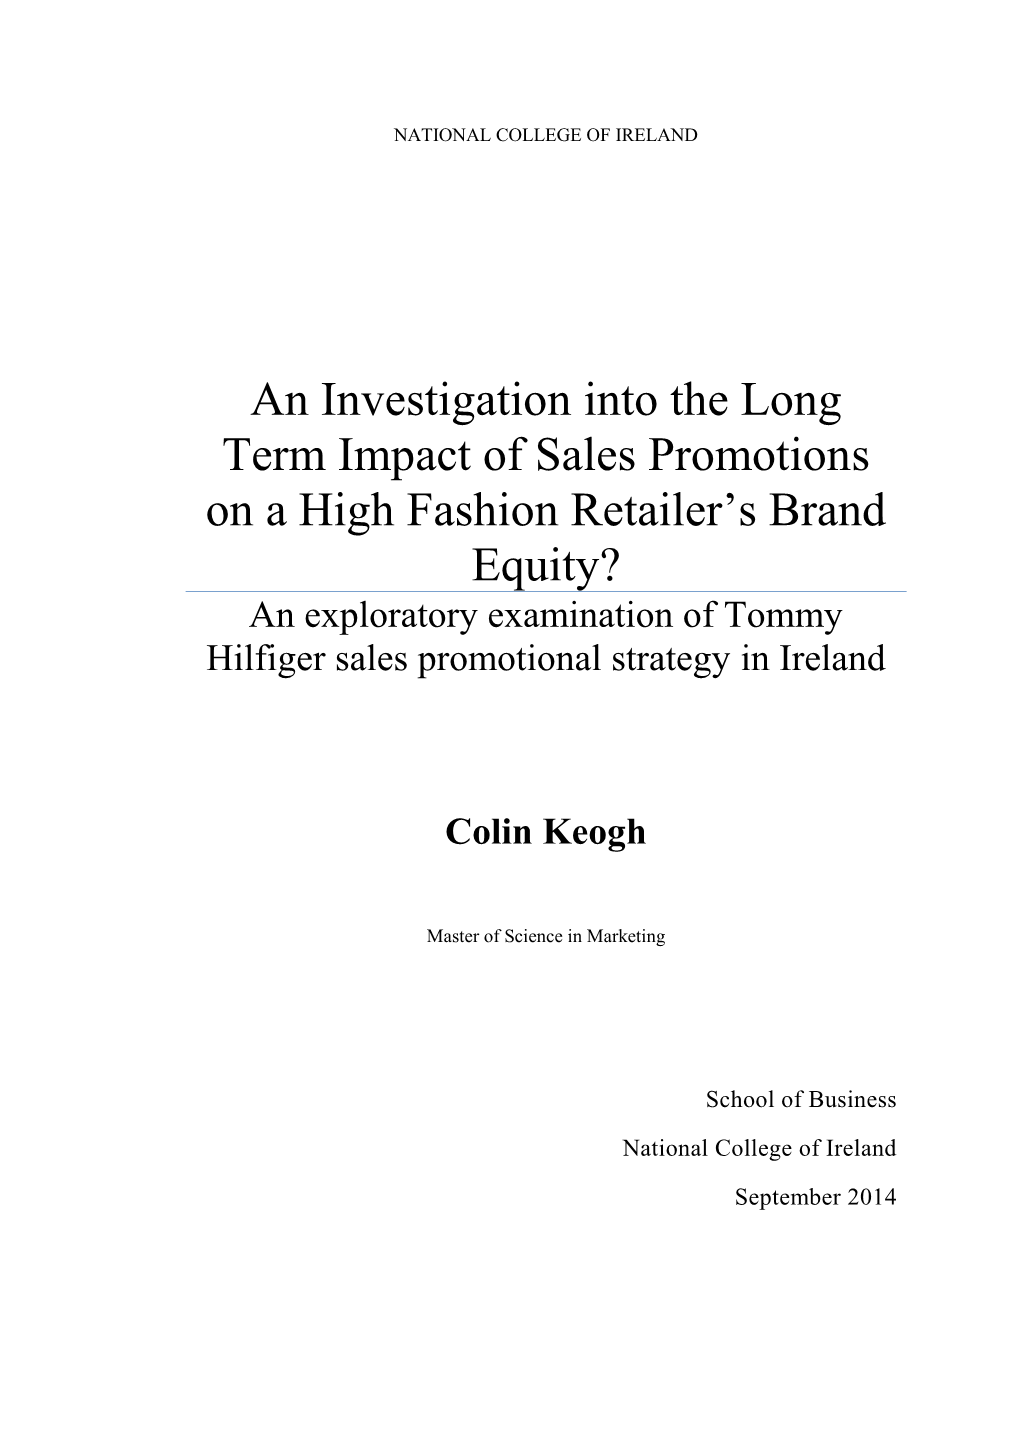 An Investigation Into the Long Term Impact of Sales Promotions on A